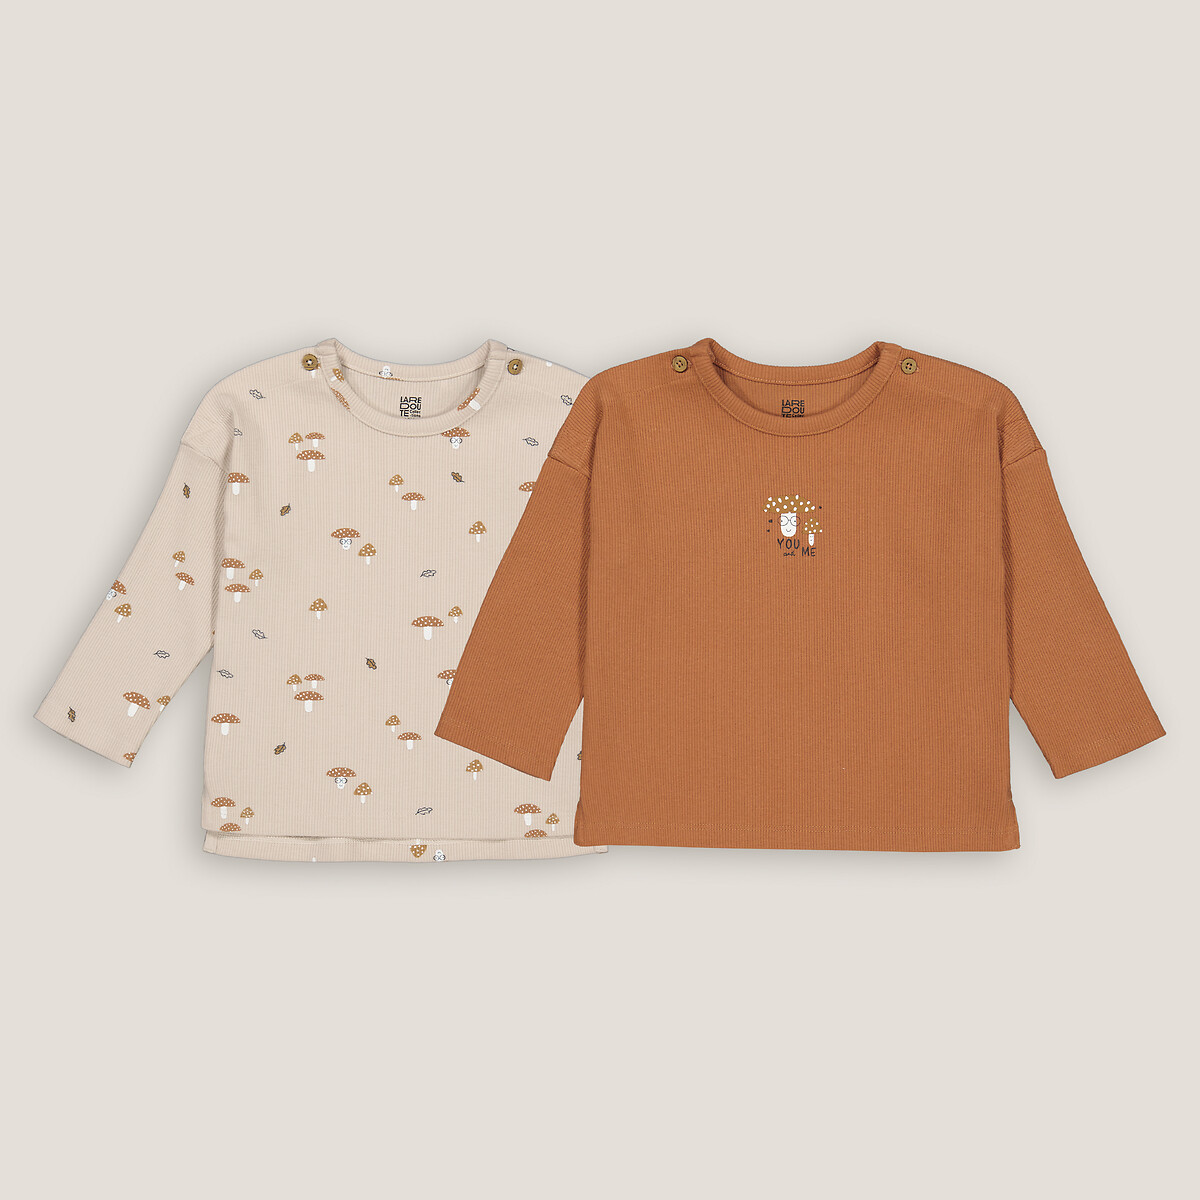 Pack of 2 T-Shirts in Cotton Mix with Long Sleeves in Mushroom Print